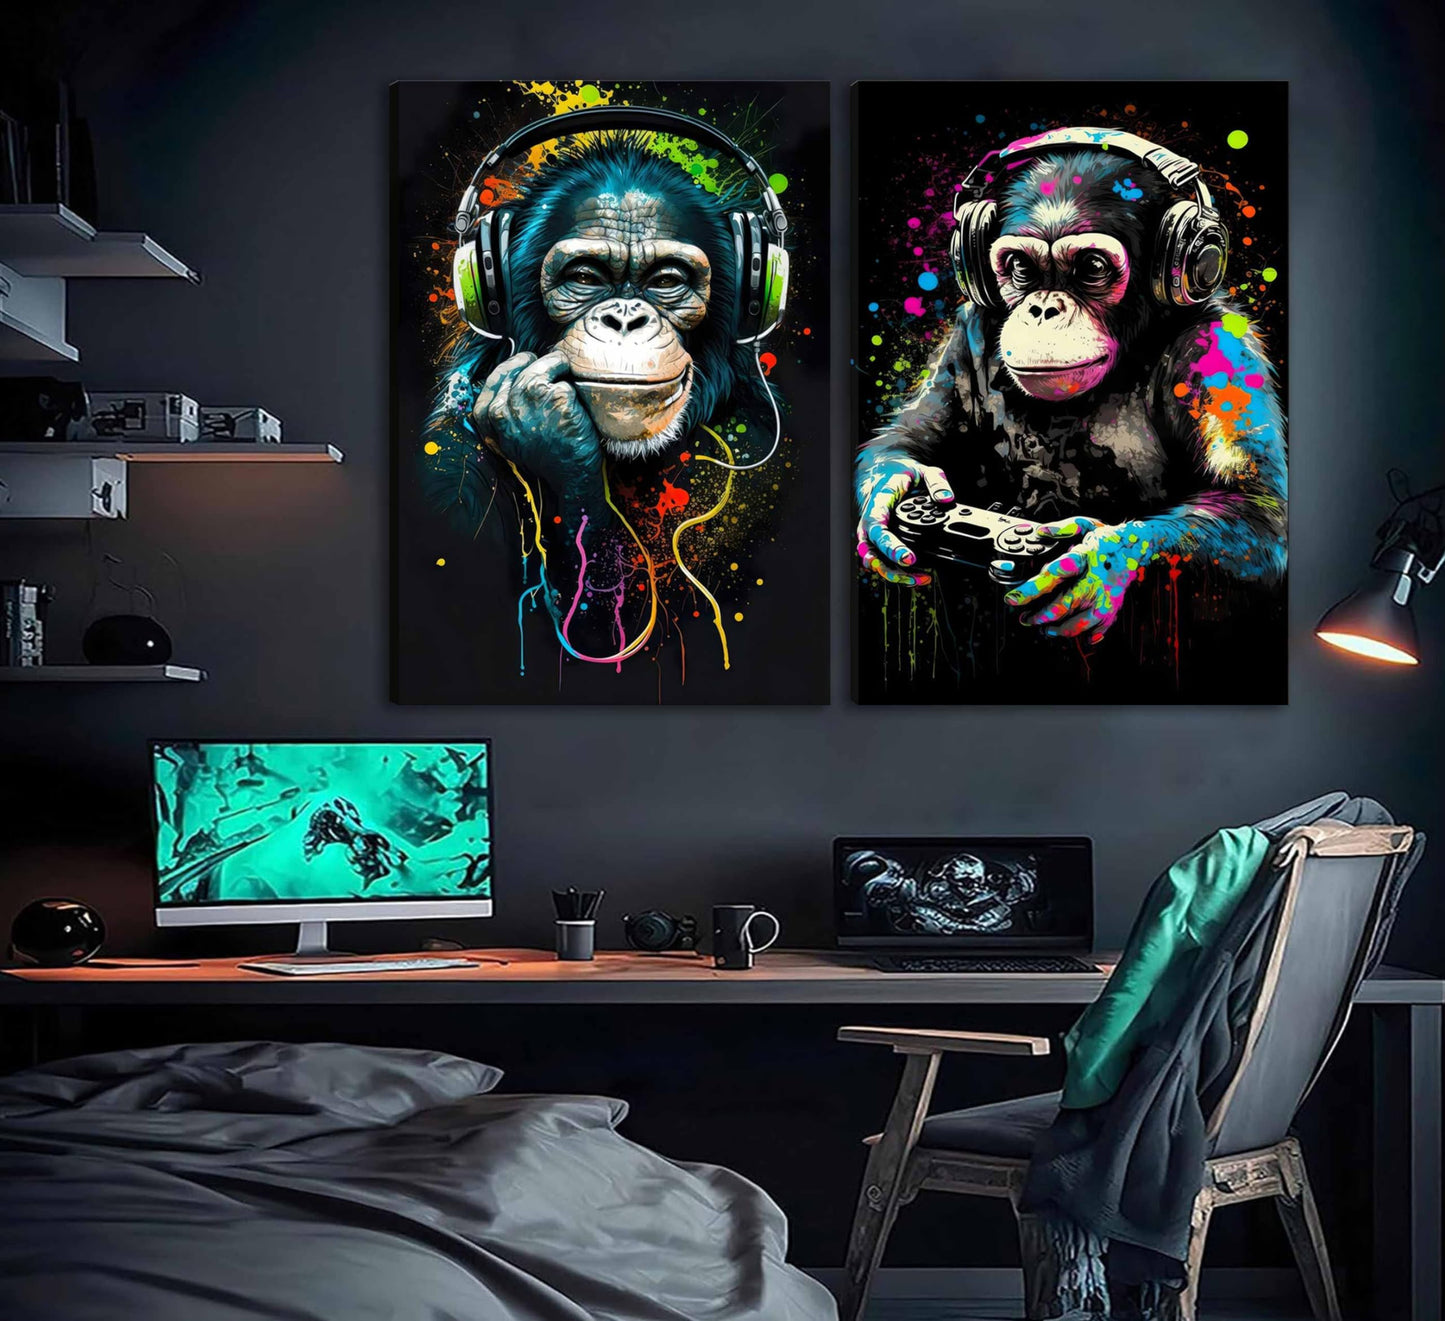 Graffiti Gaming Canvas Wall Art Game Room Decor Boys Gamer Controller Poster Animals Vintage Watercolor Cool Music Chimpanzee Pictures Painting Boys teeny Room Kids Game for Room Bedroom Decoration